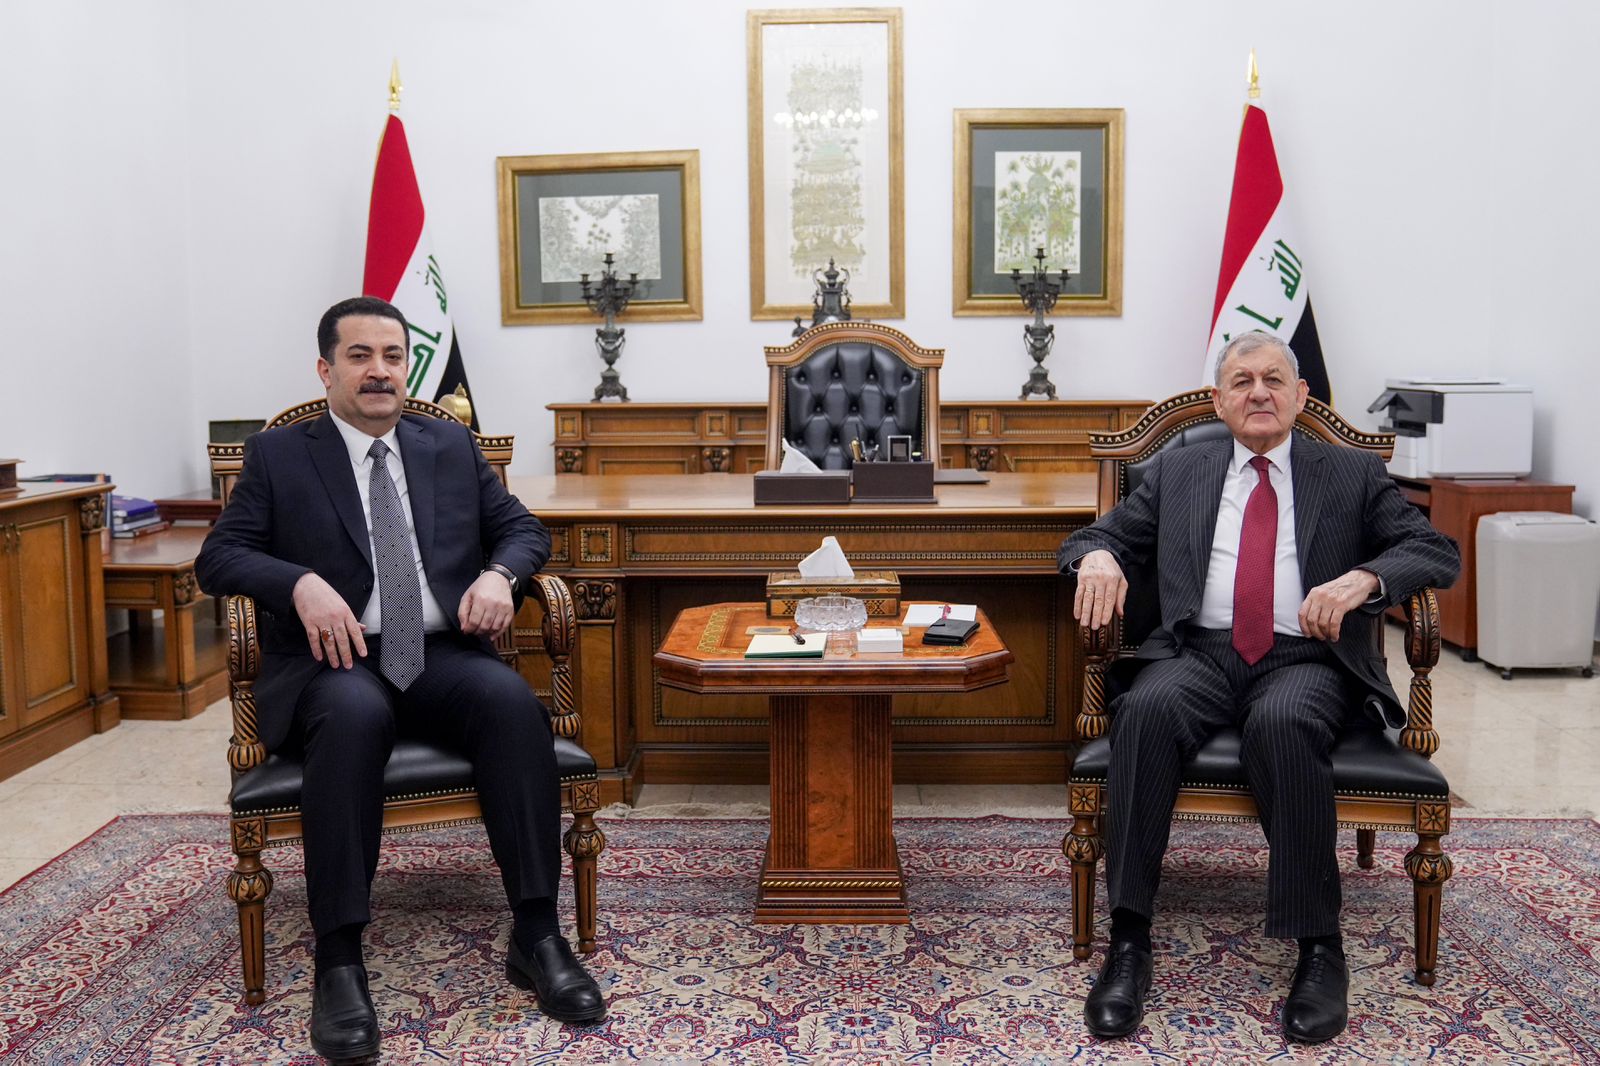 Iraqi President and PM discuss national security, economic development, and regional collaboration